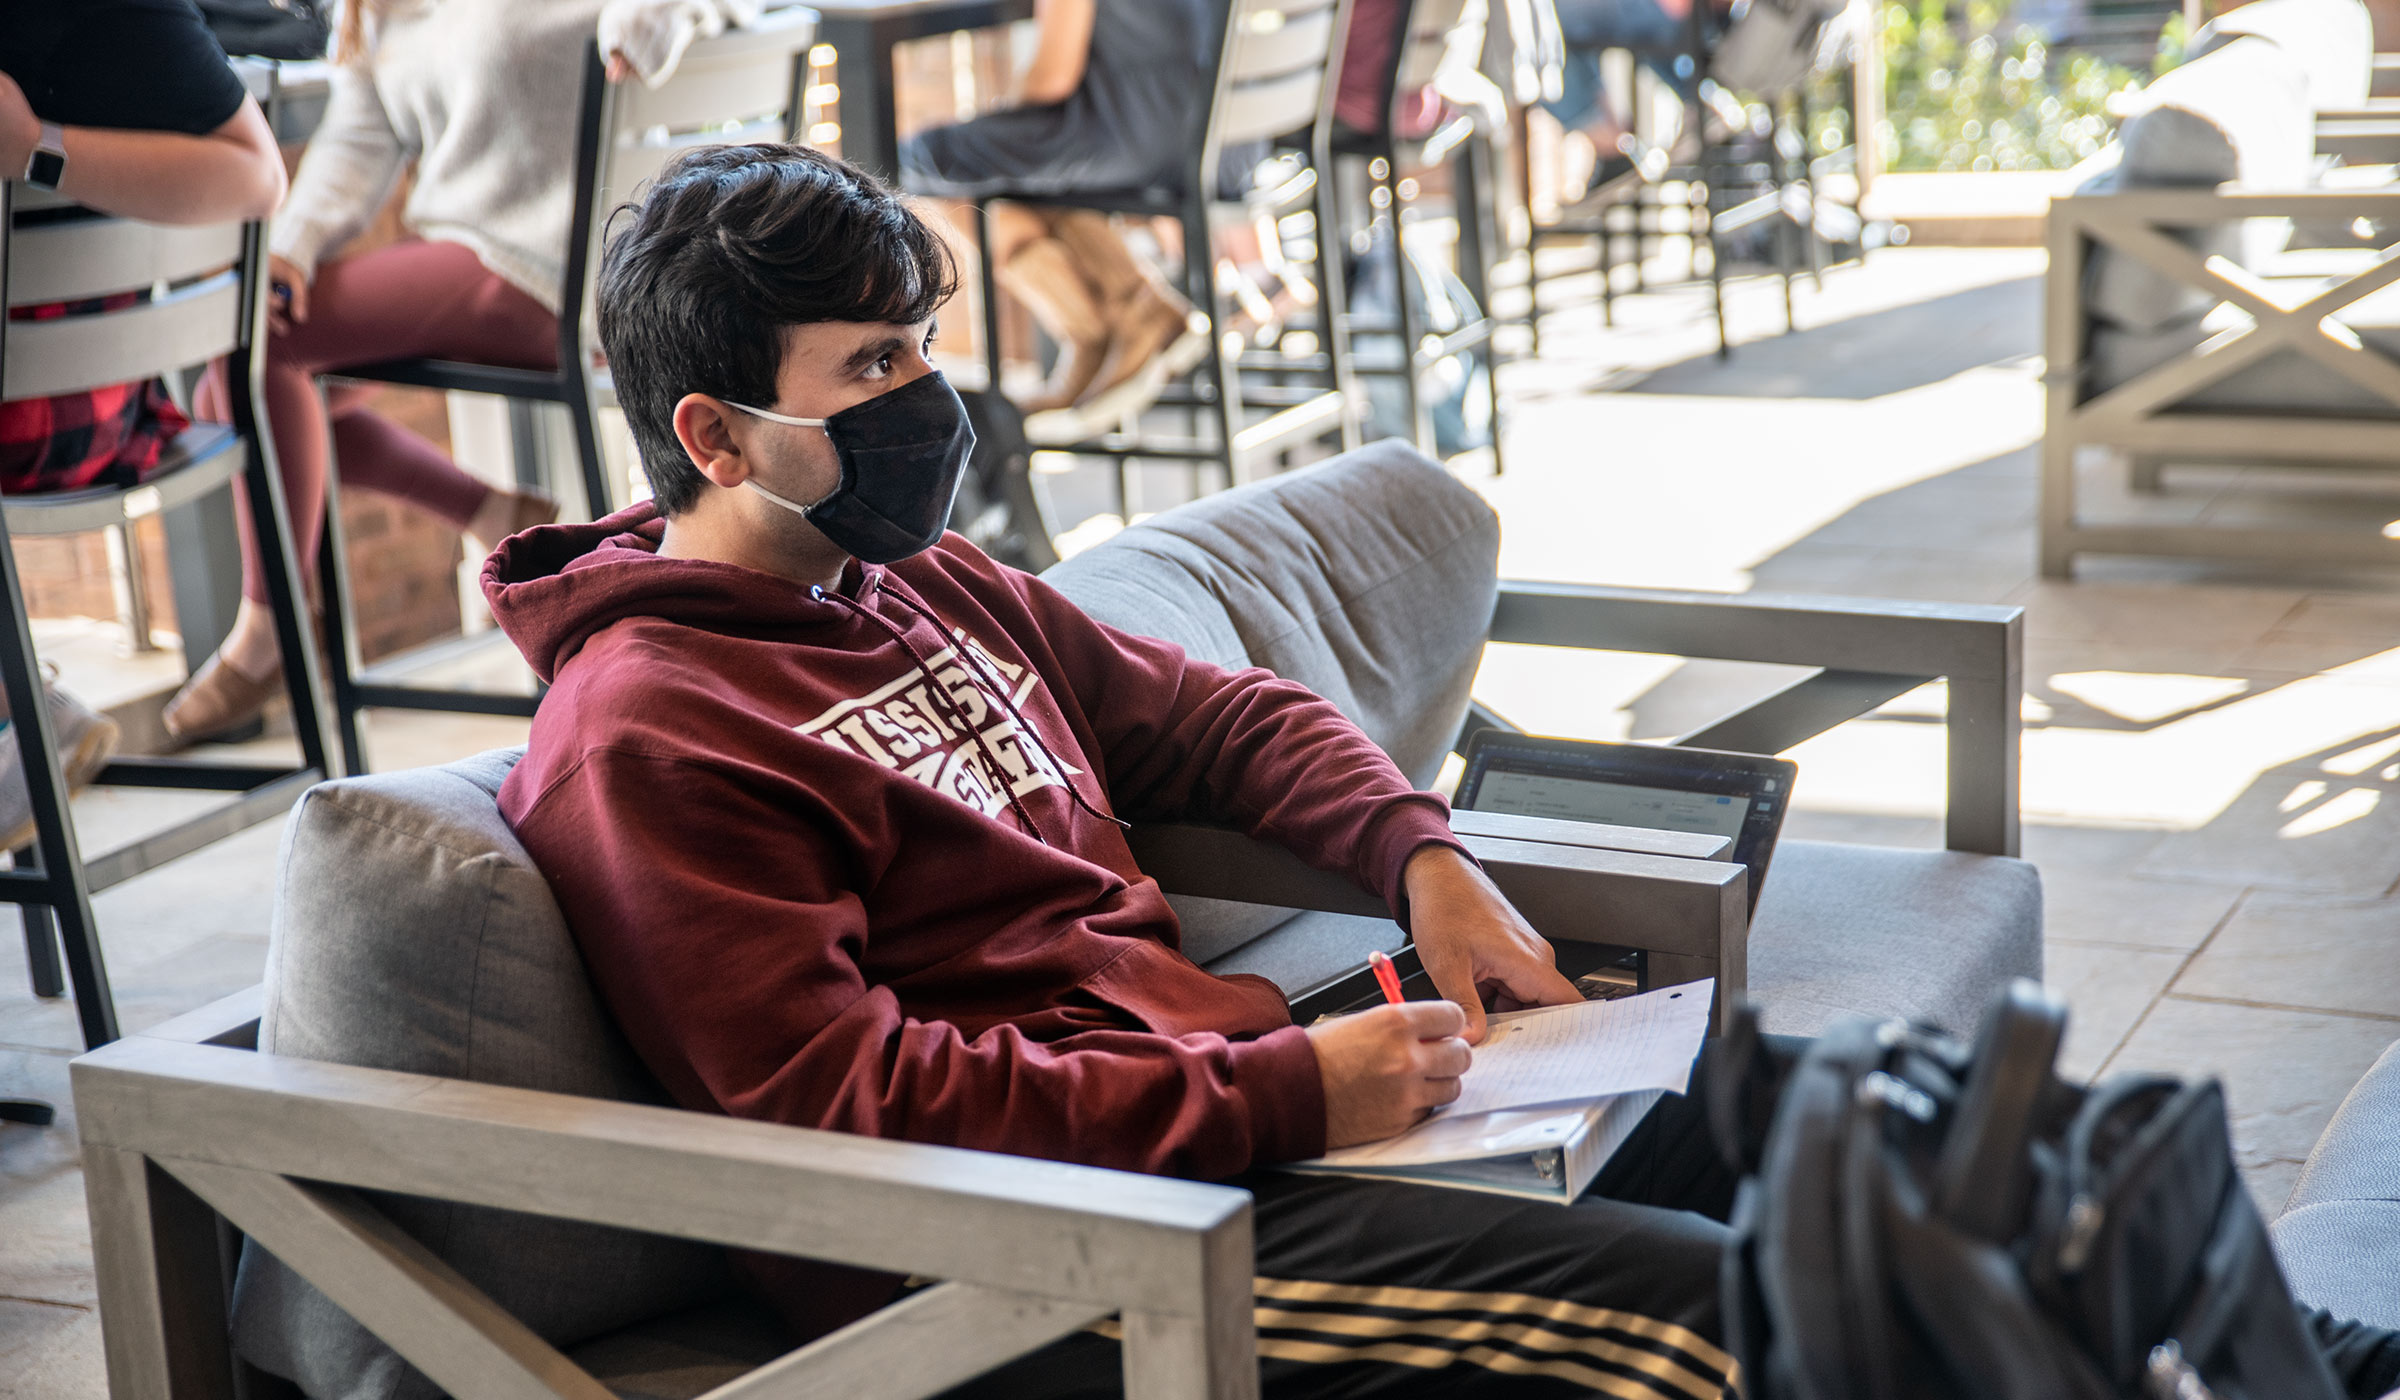 Software Engineering major Aaron Williams studies at one of the couches at Colvard Union&#039;s the recently covered porch space.